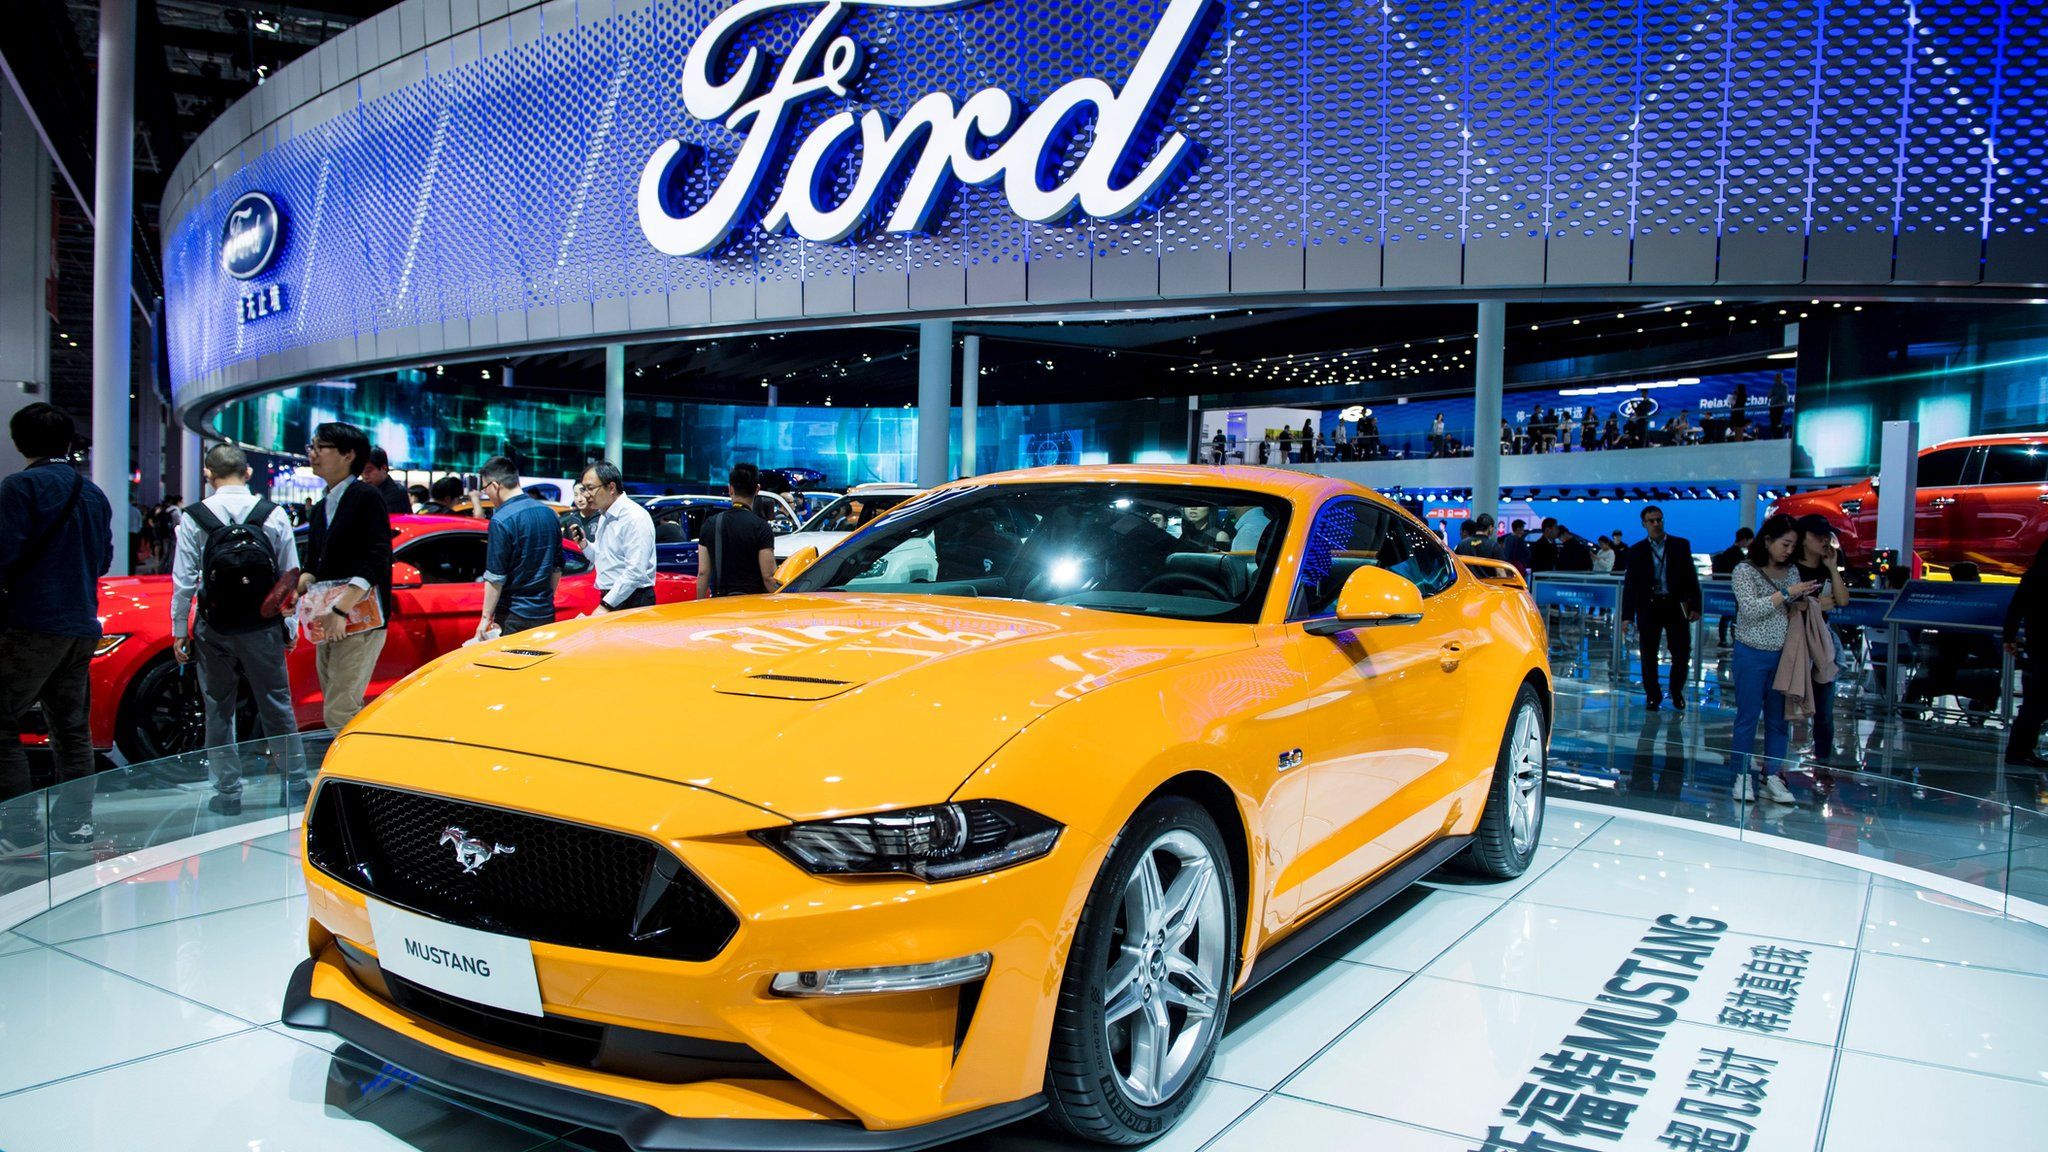 The new Ford Mustang is displayed during the first day of the 17th Shanghai International Automobile Industry Exhibition in Shanghai on April 19, 2017.